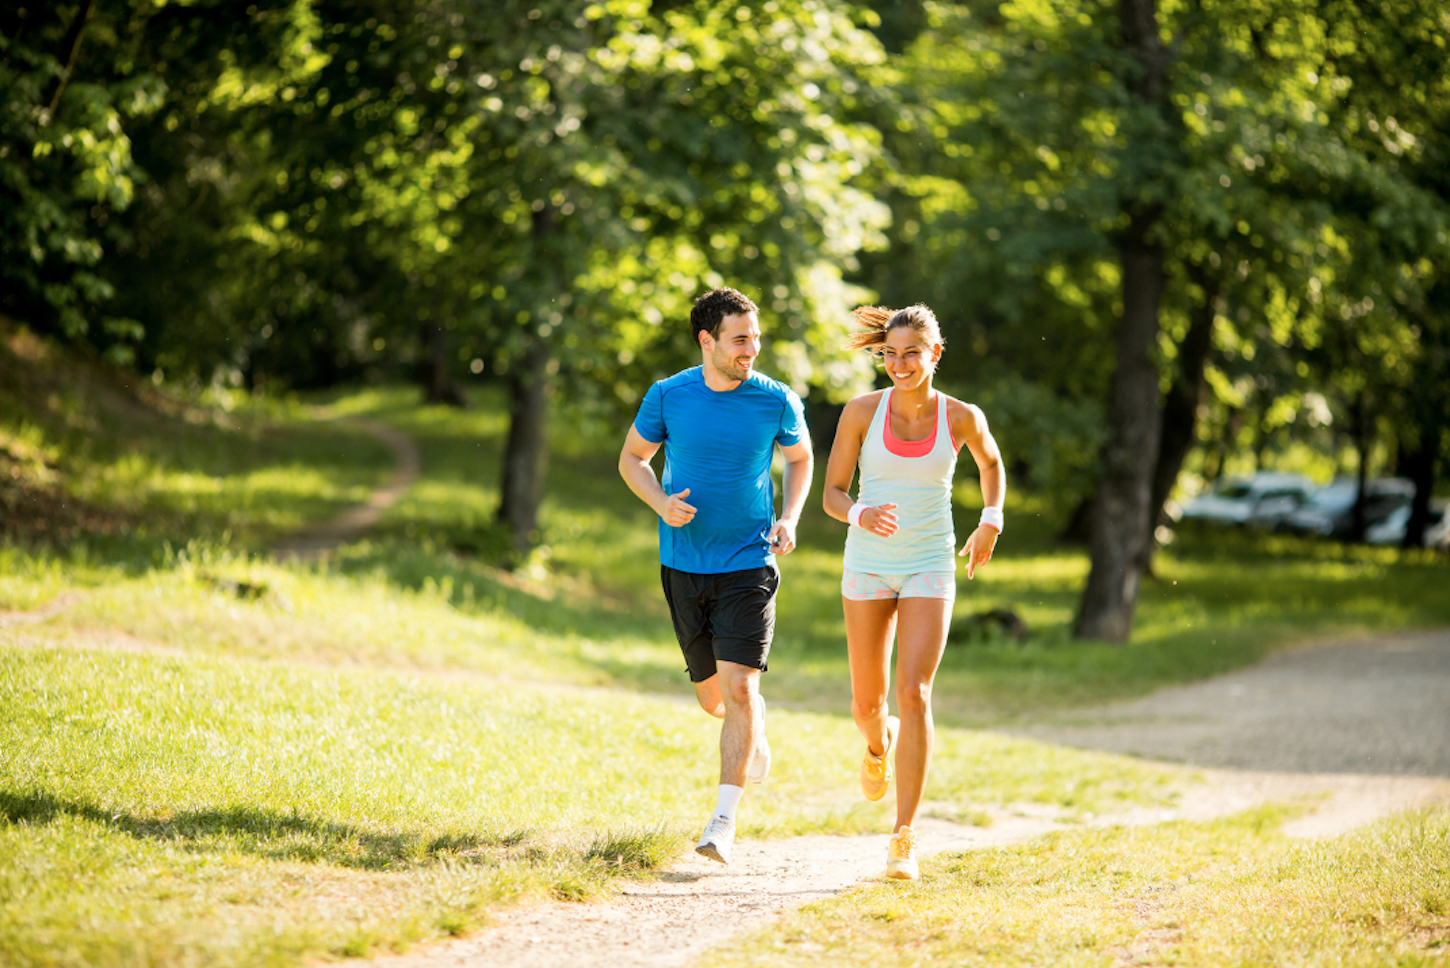 two people smiling running on a trail in a park